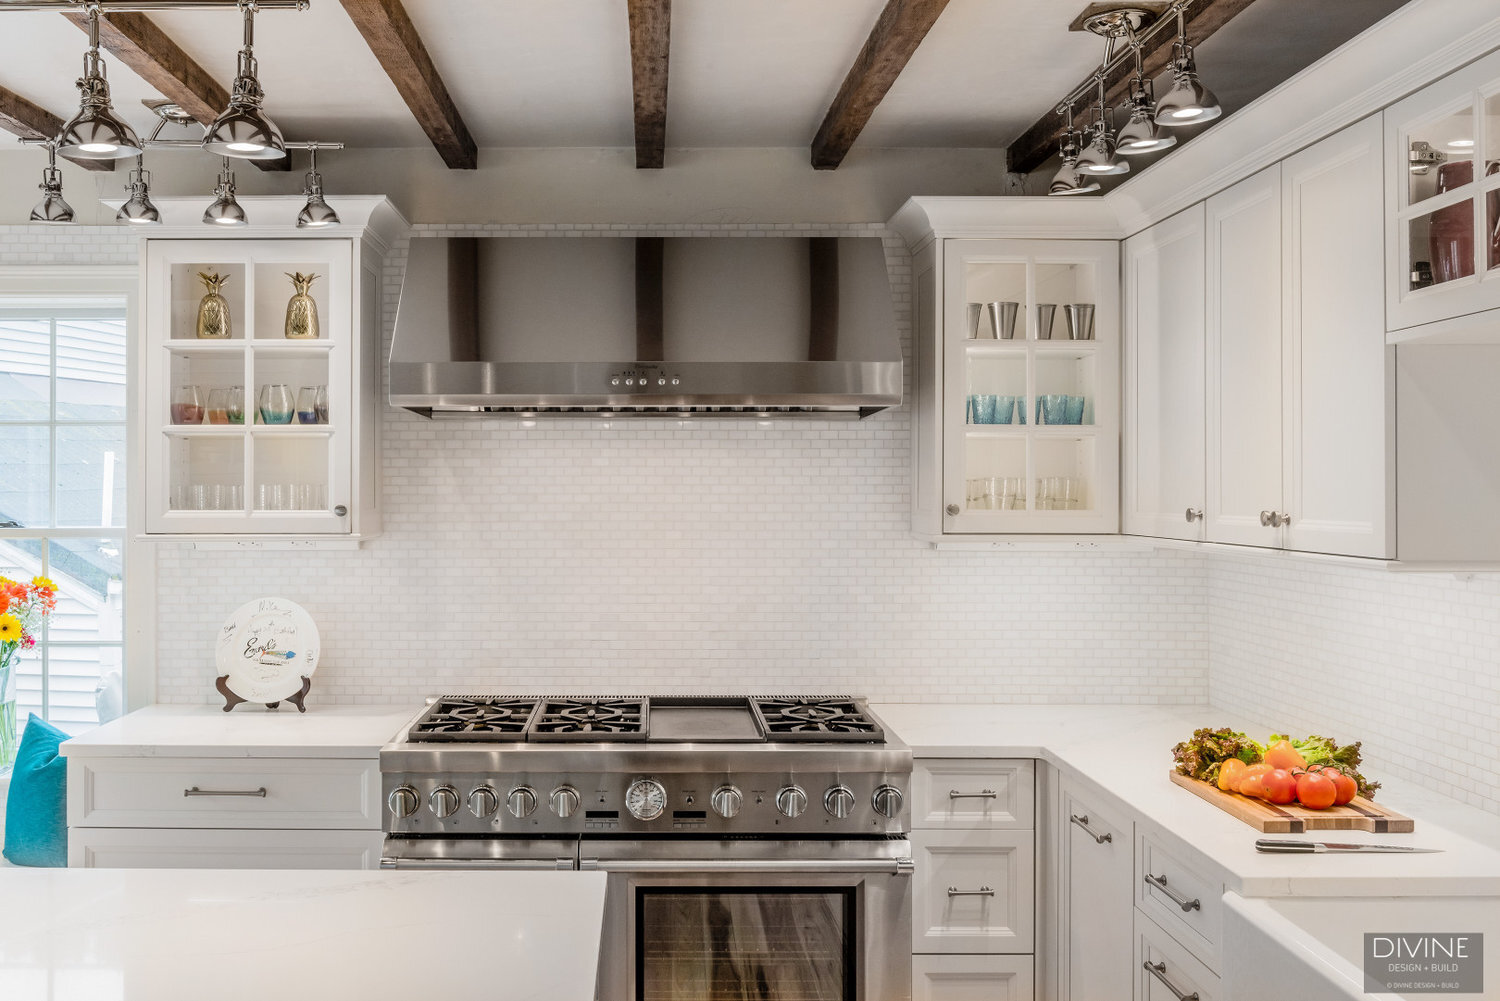 white, shaker style cabinets with brushed nickel accessories, white mosaic subway tile backsplash, cambria countertops with light marbling in grey tone and thermador appliances. Exposed beams